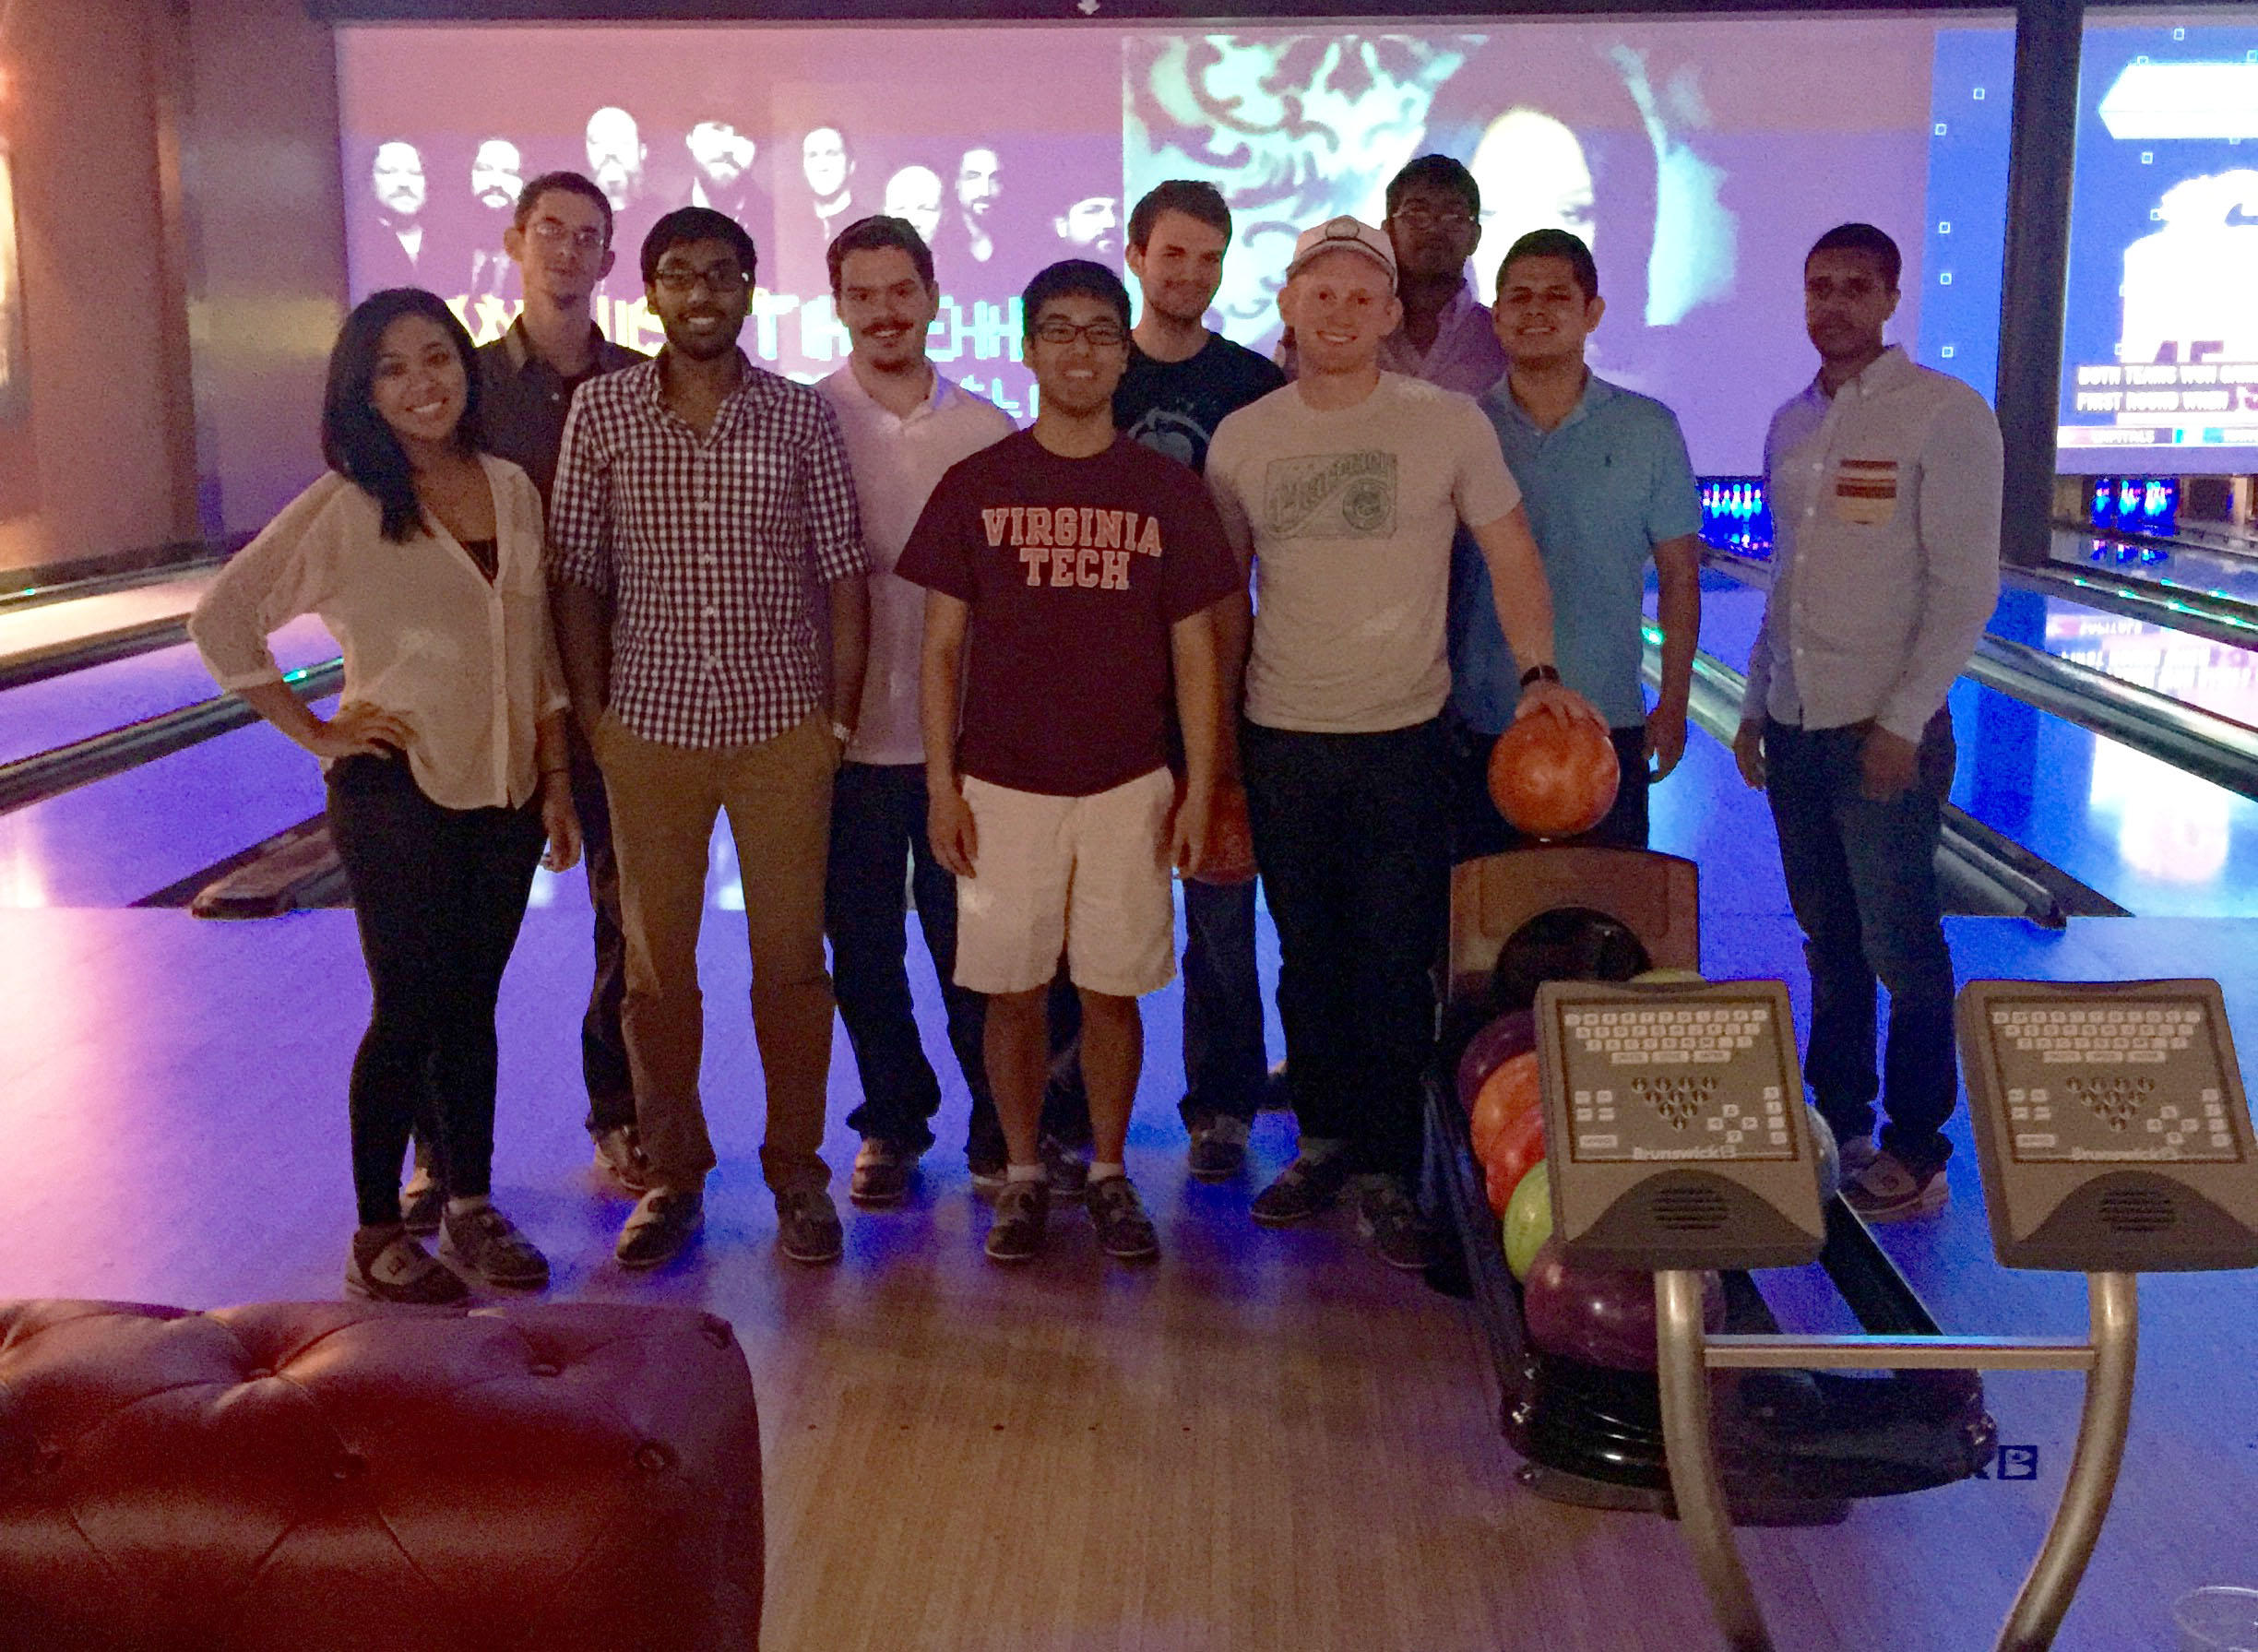 Students in a recent NetApp Transitions program participate in a team building activity at a Blacksburg bowling alley.